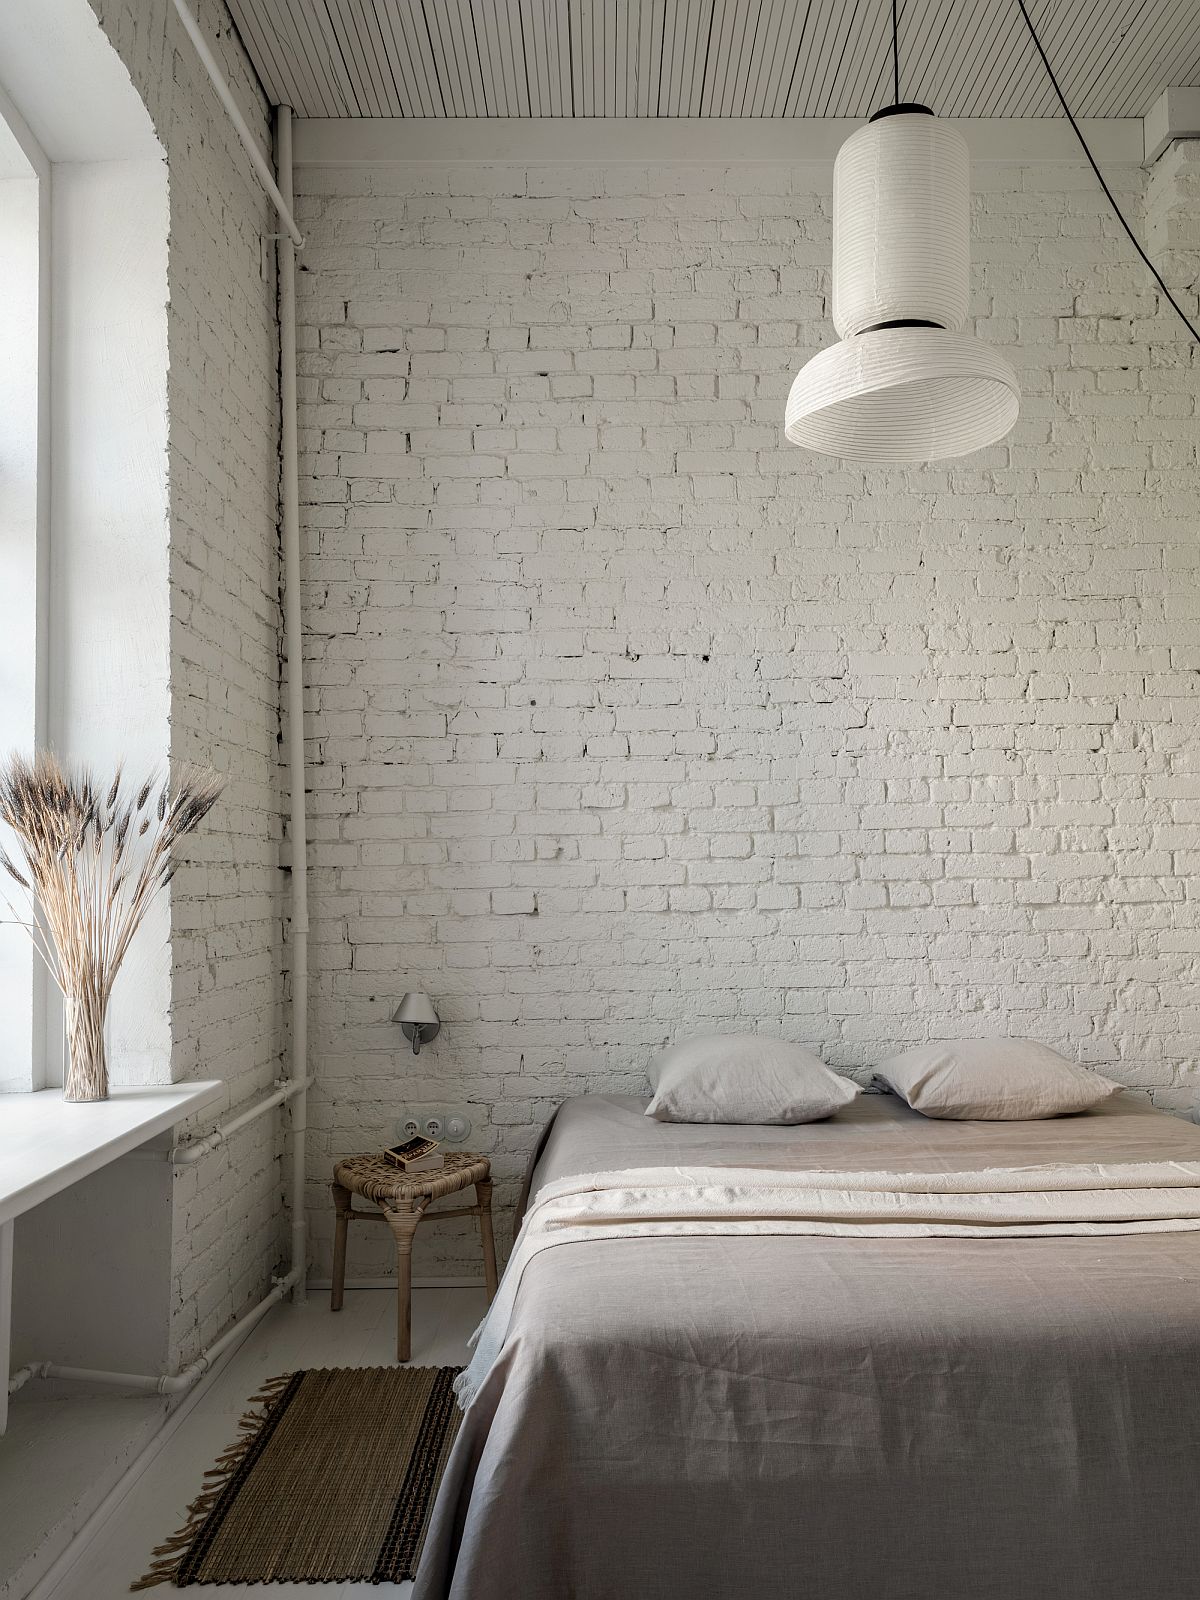 Large-pendant-light-in-white-along-with-a-window-illuminate-the-white-bedroom-with-brick-wall-94274